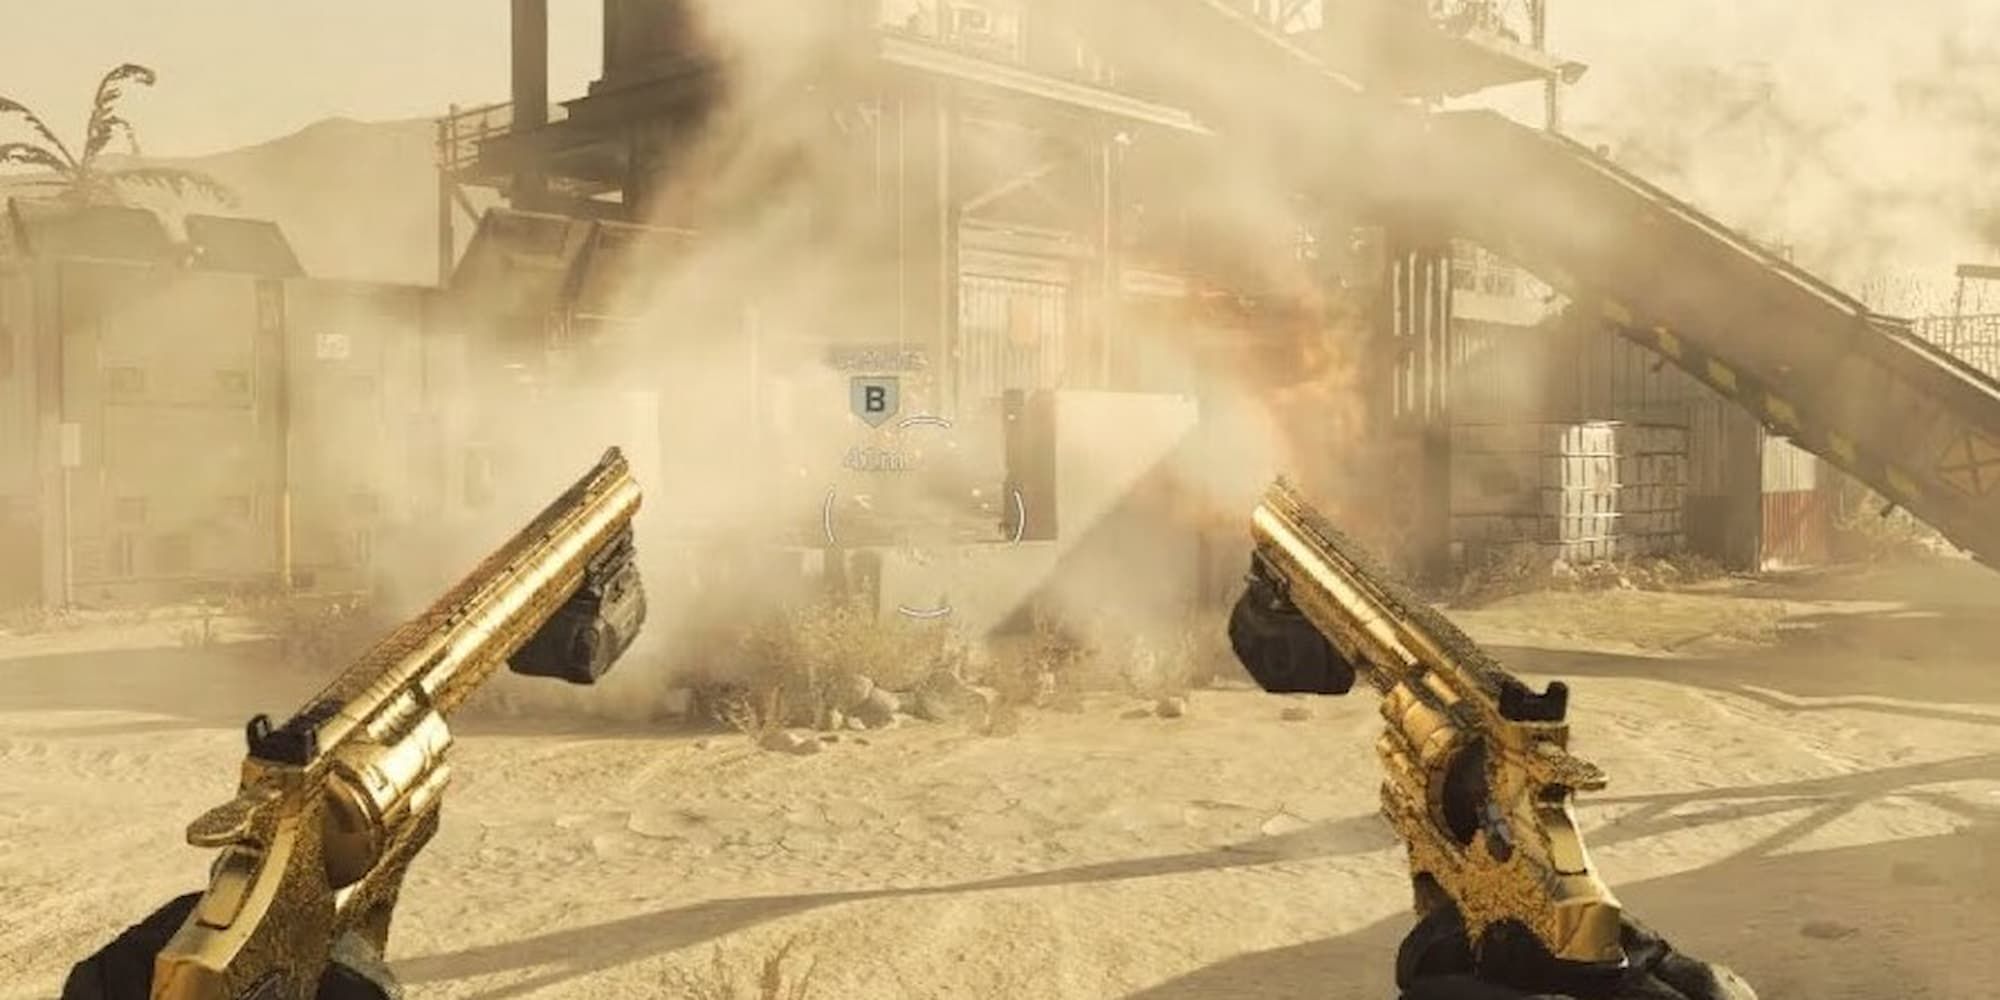 A look at the golden Akimbo Snakeshots build in Call of Duty.